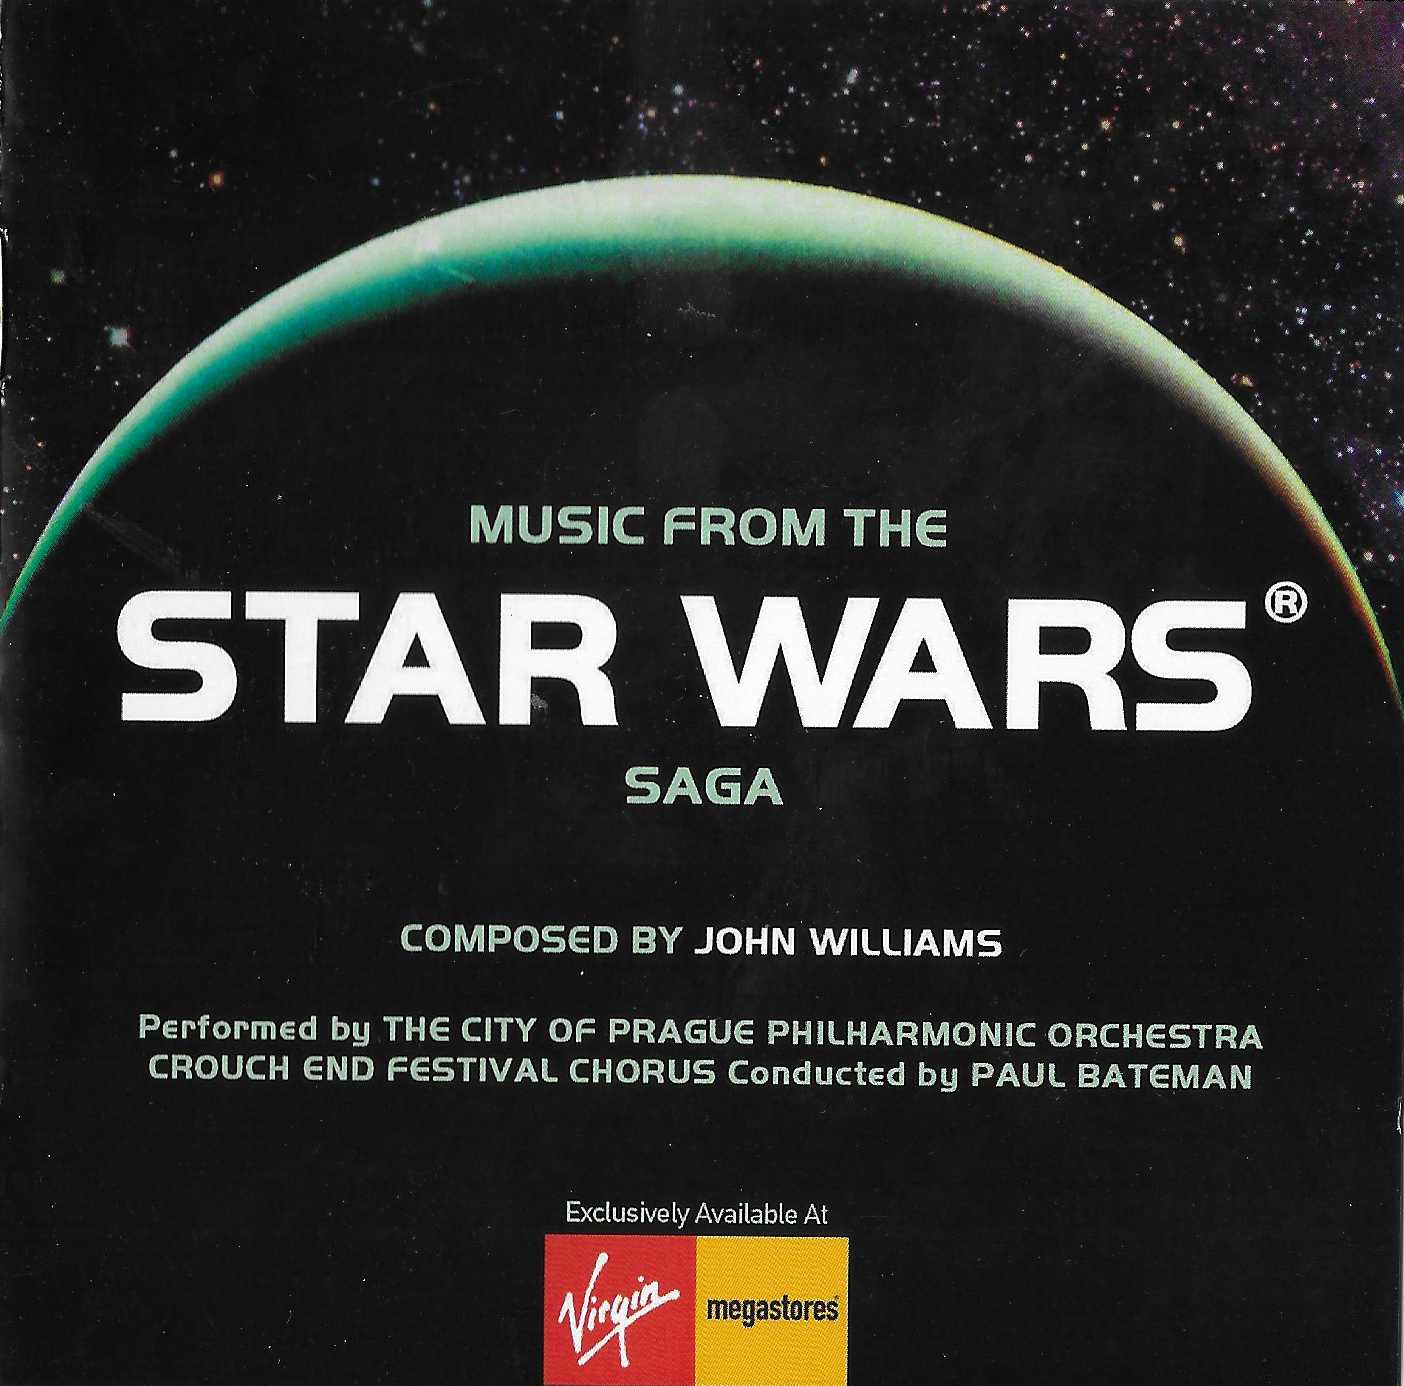 Picture of Music from the Star Wars saga by artist John Williams from ITV, Channel 4 and Channel 5 cds library